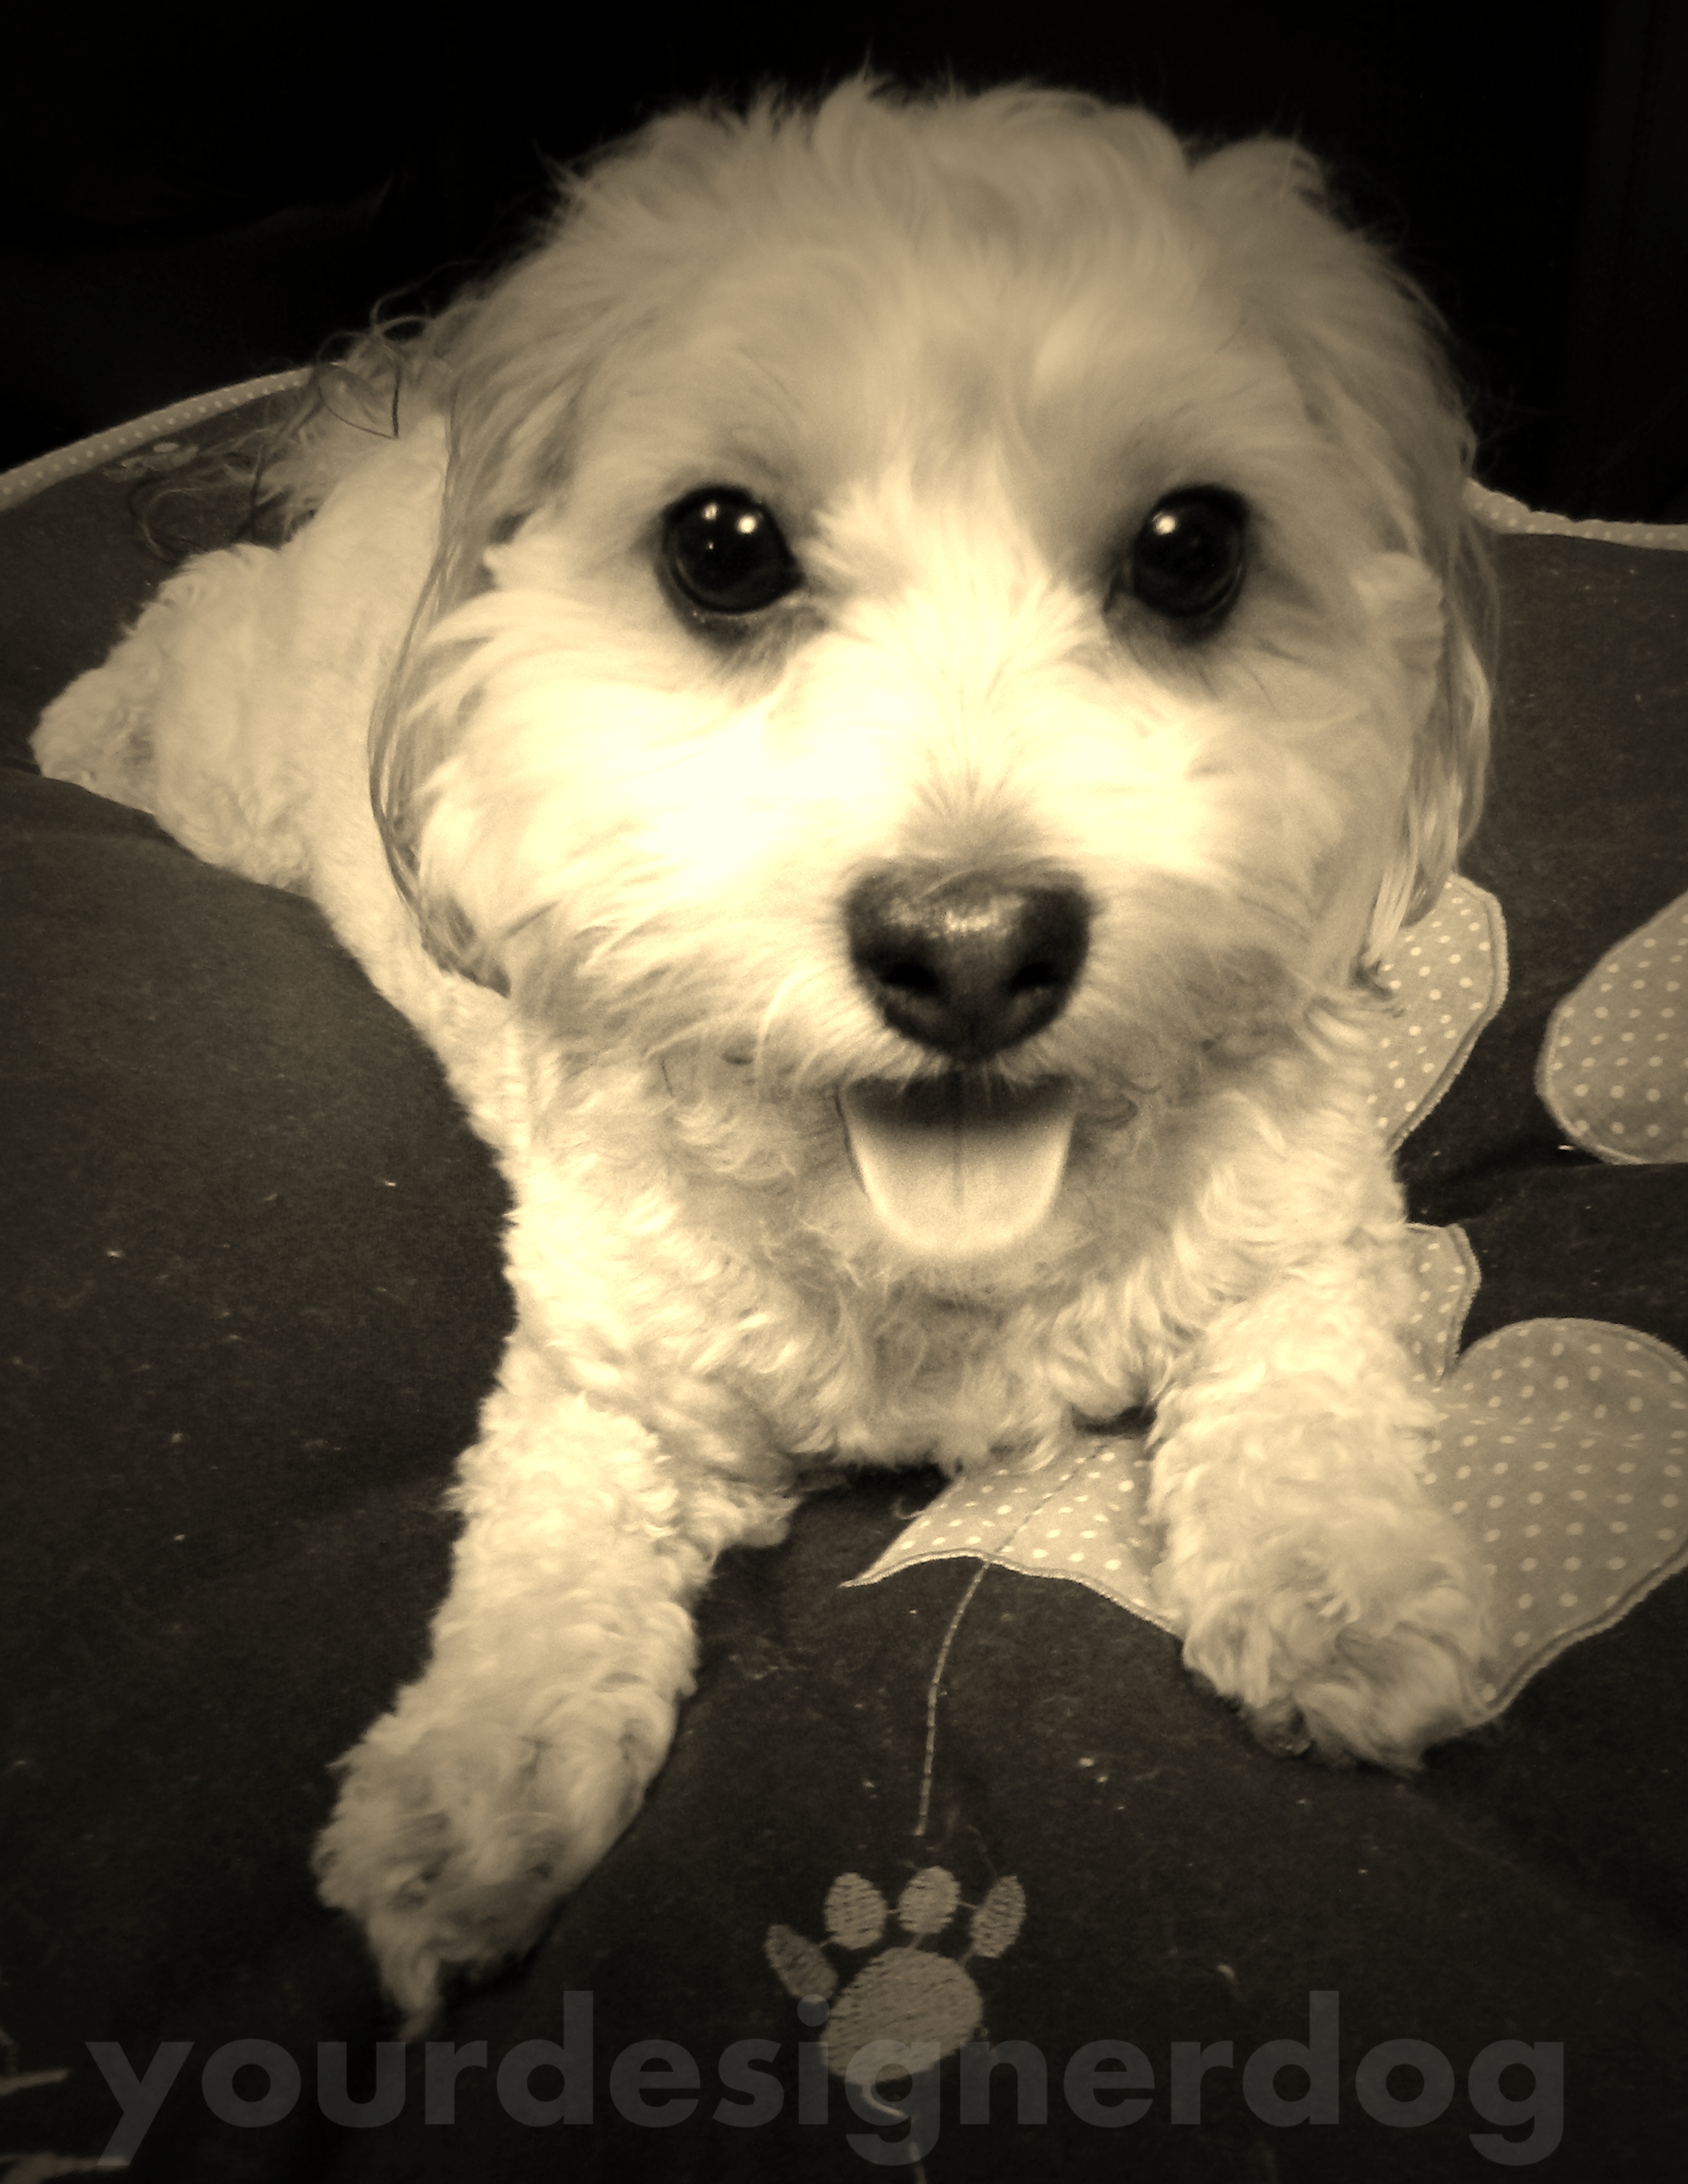 dogs, designer dogs, yorkipoo, yorkie poo, tongue out, sepia photography